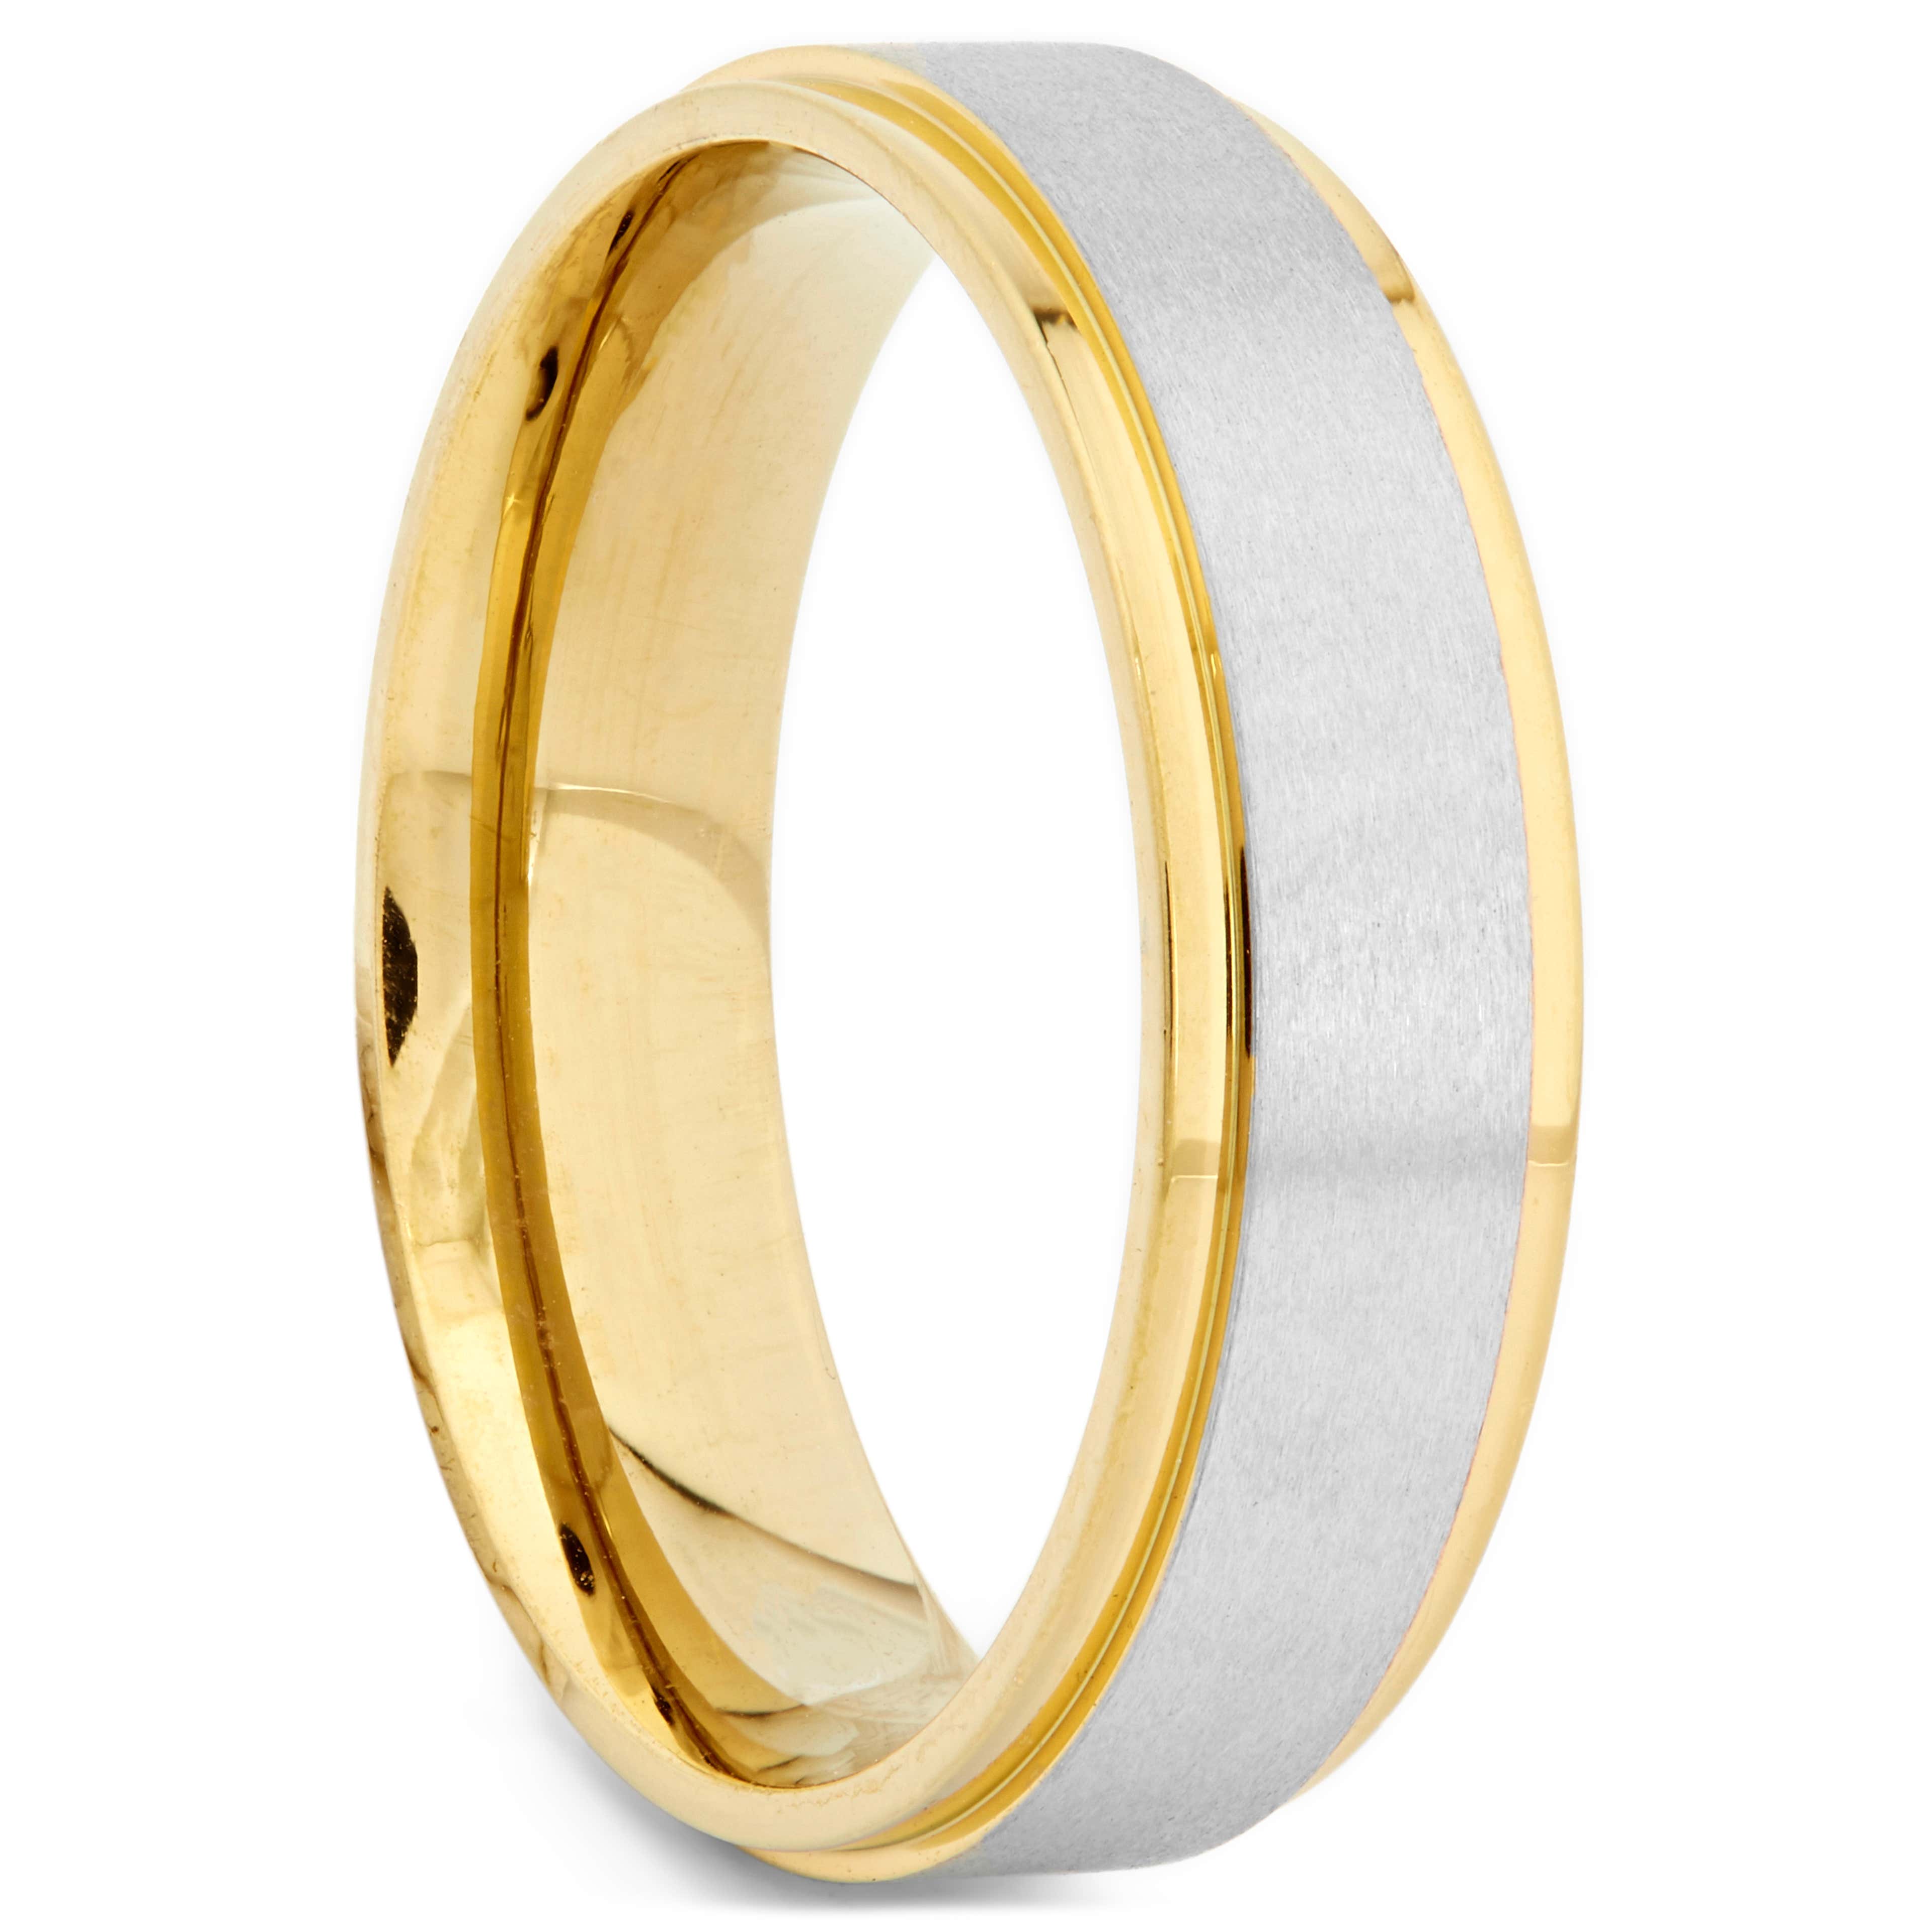 Gold-Tone & Silver-Tone Ring